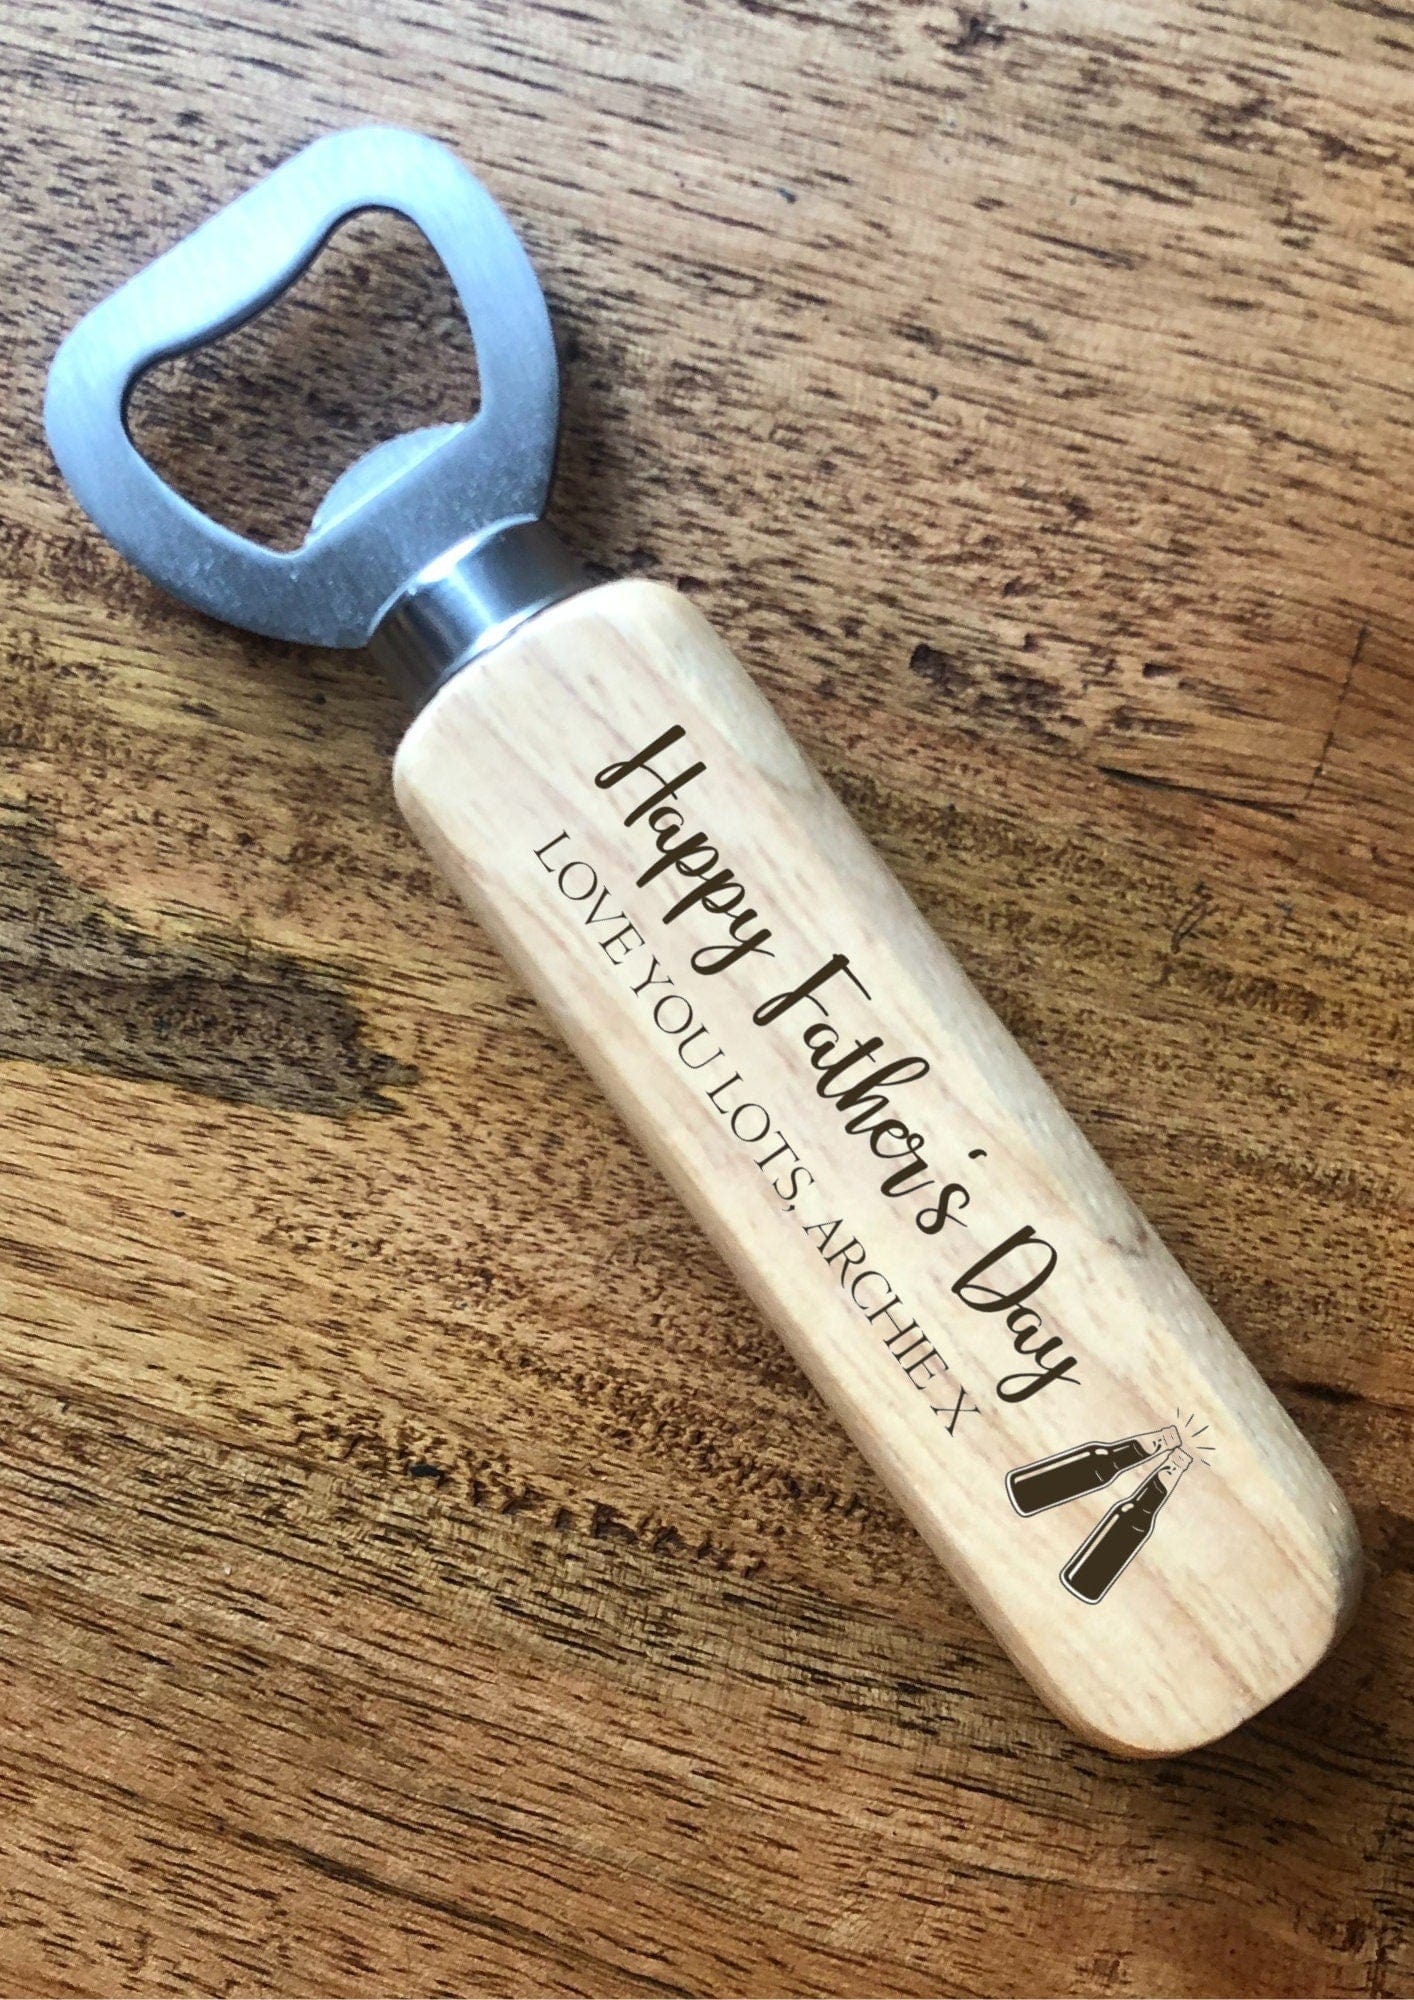 Happy Fathers Day Personalised Present, Beer Lover Personalised Bottle Opener, Wooden Gift for Daddy